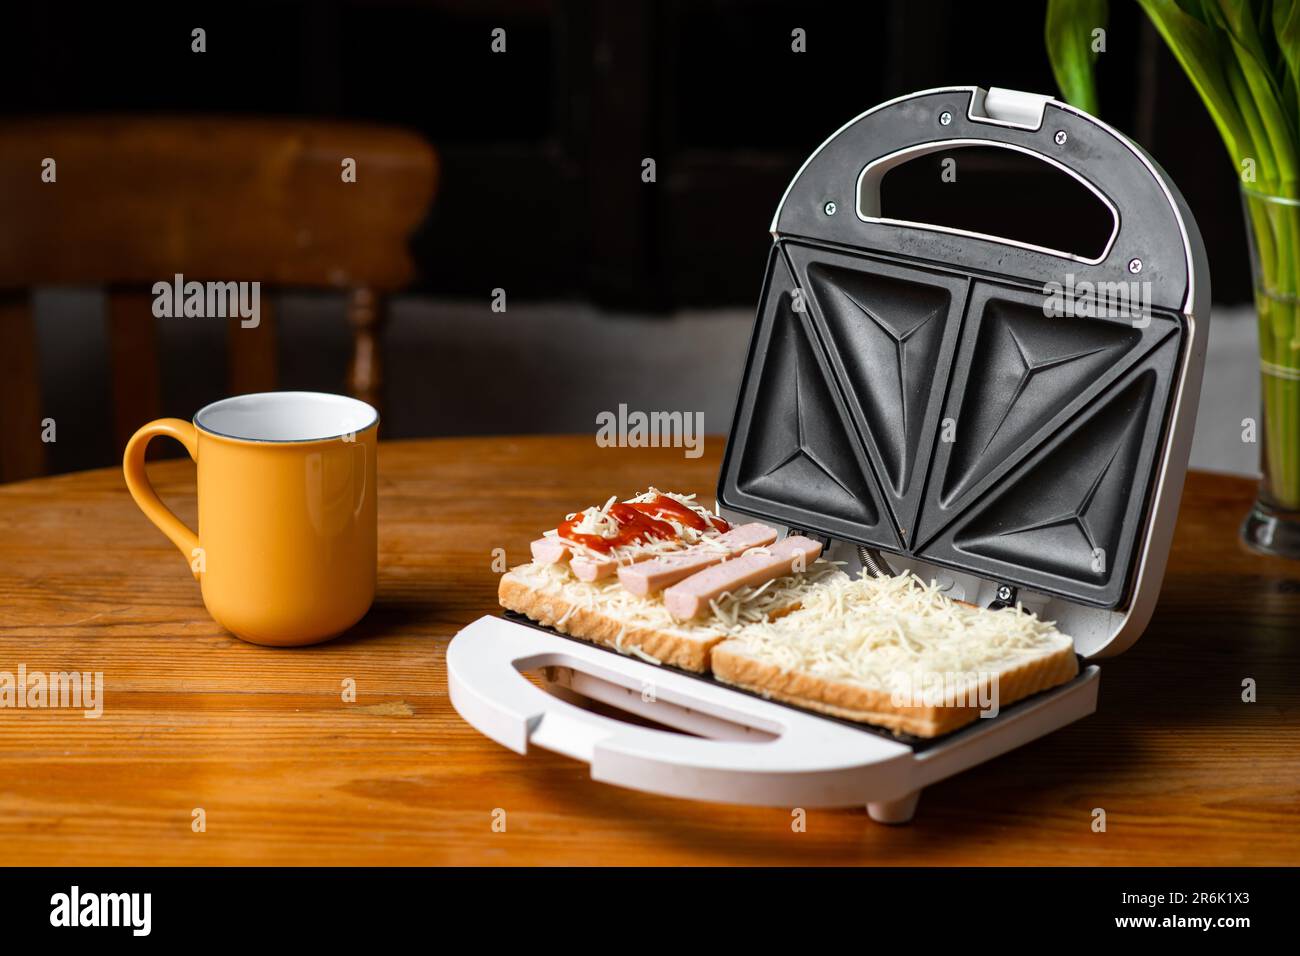 https://c8.alamy.com/comp/2R6K1X3/open-sandwich-maker-with-cheese-toast-and-sausages-sandwiching-2R6K1X3.jpg